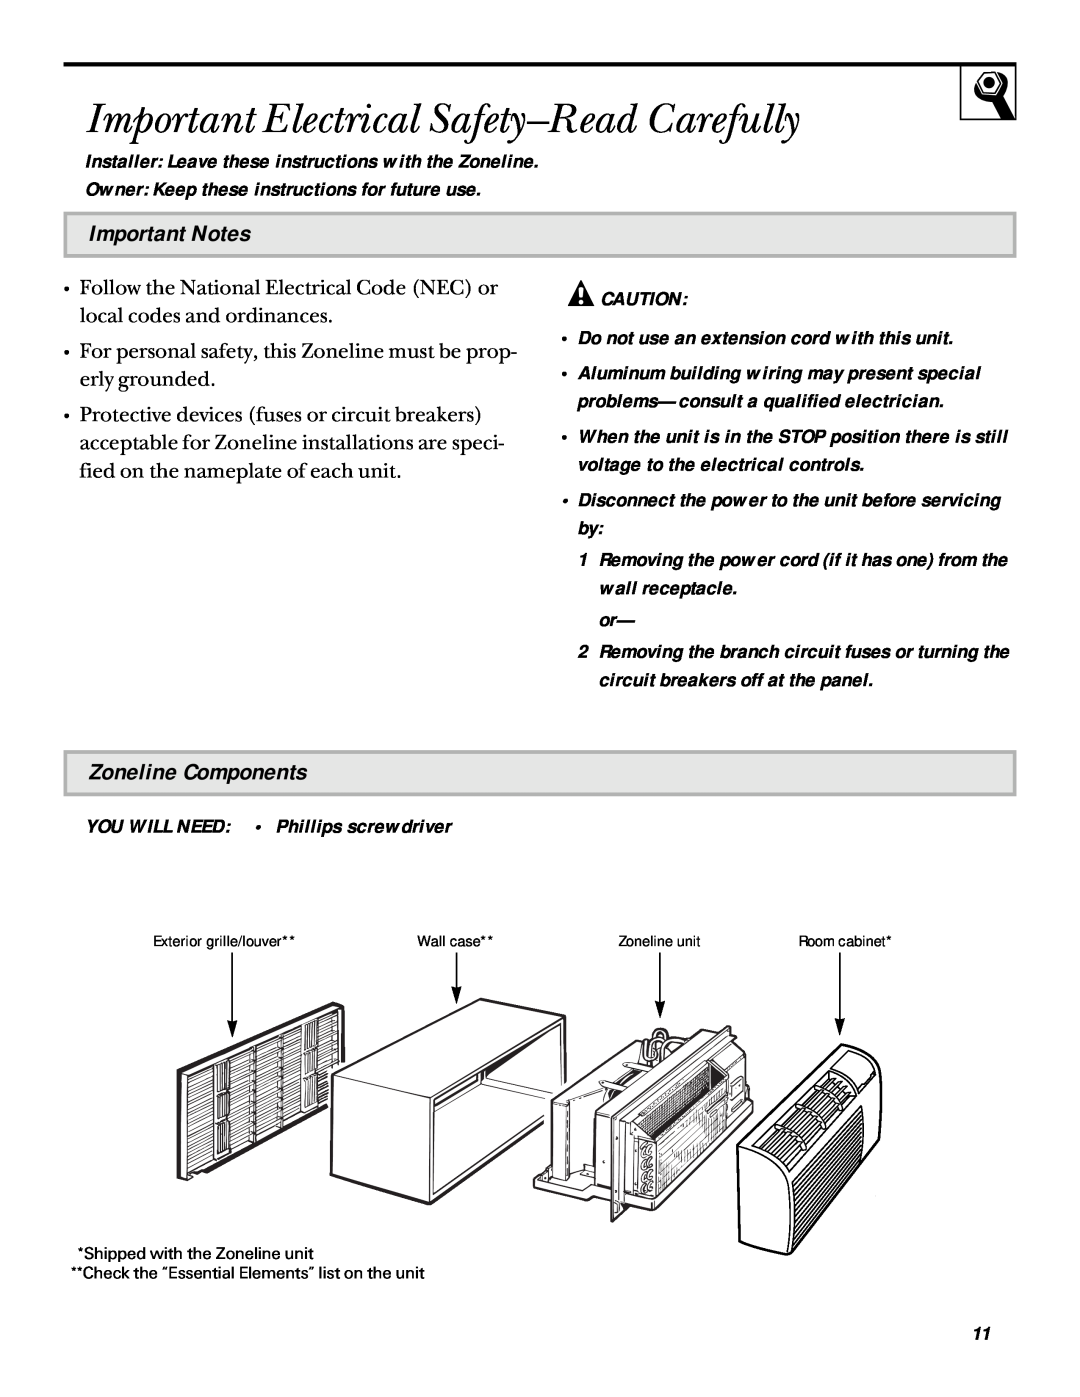 GE 3200 installation instructions Important Electrical Safety-ReadCarefully, Important Notes, Zoneline Components 